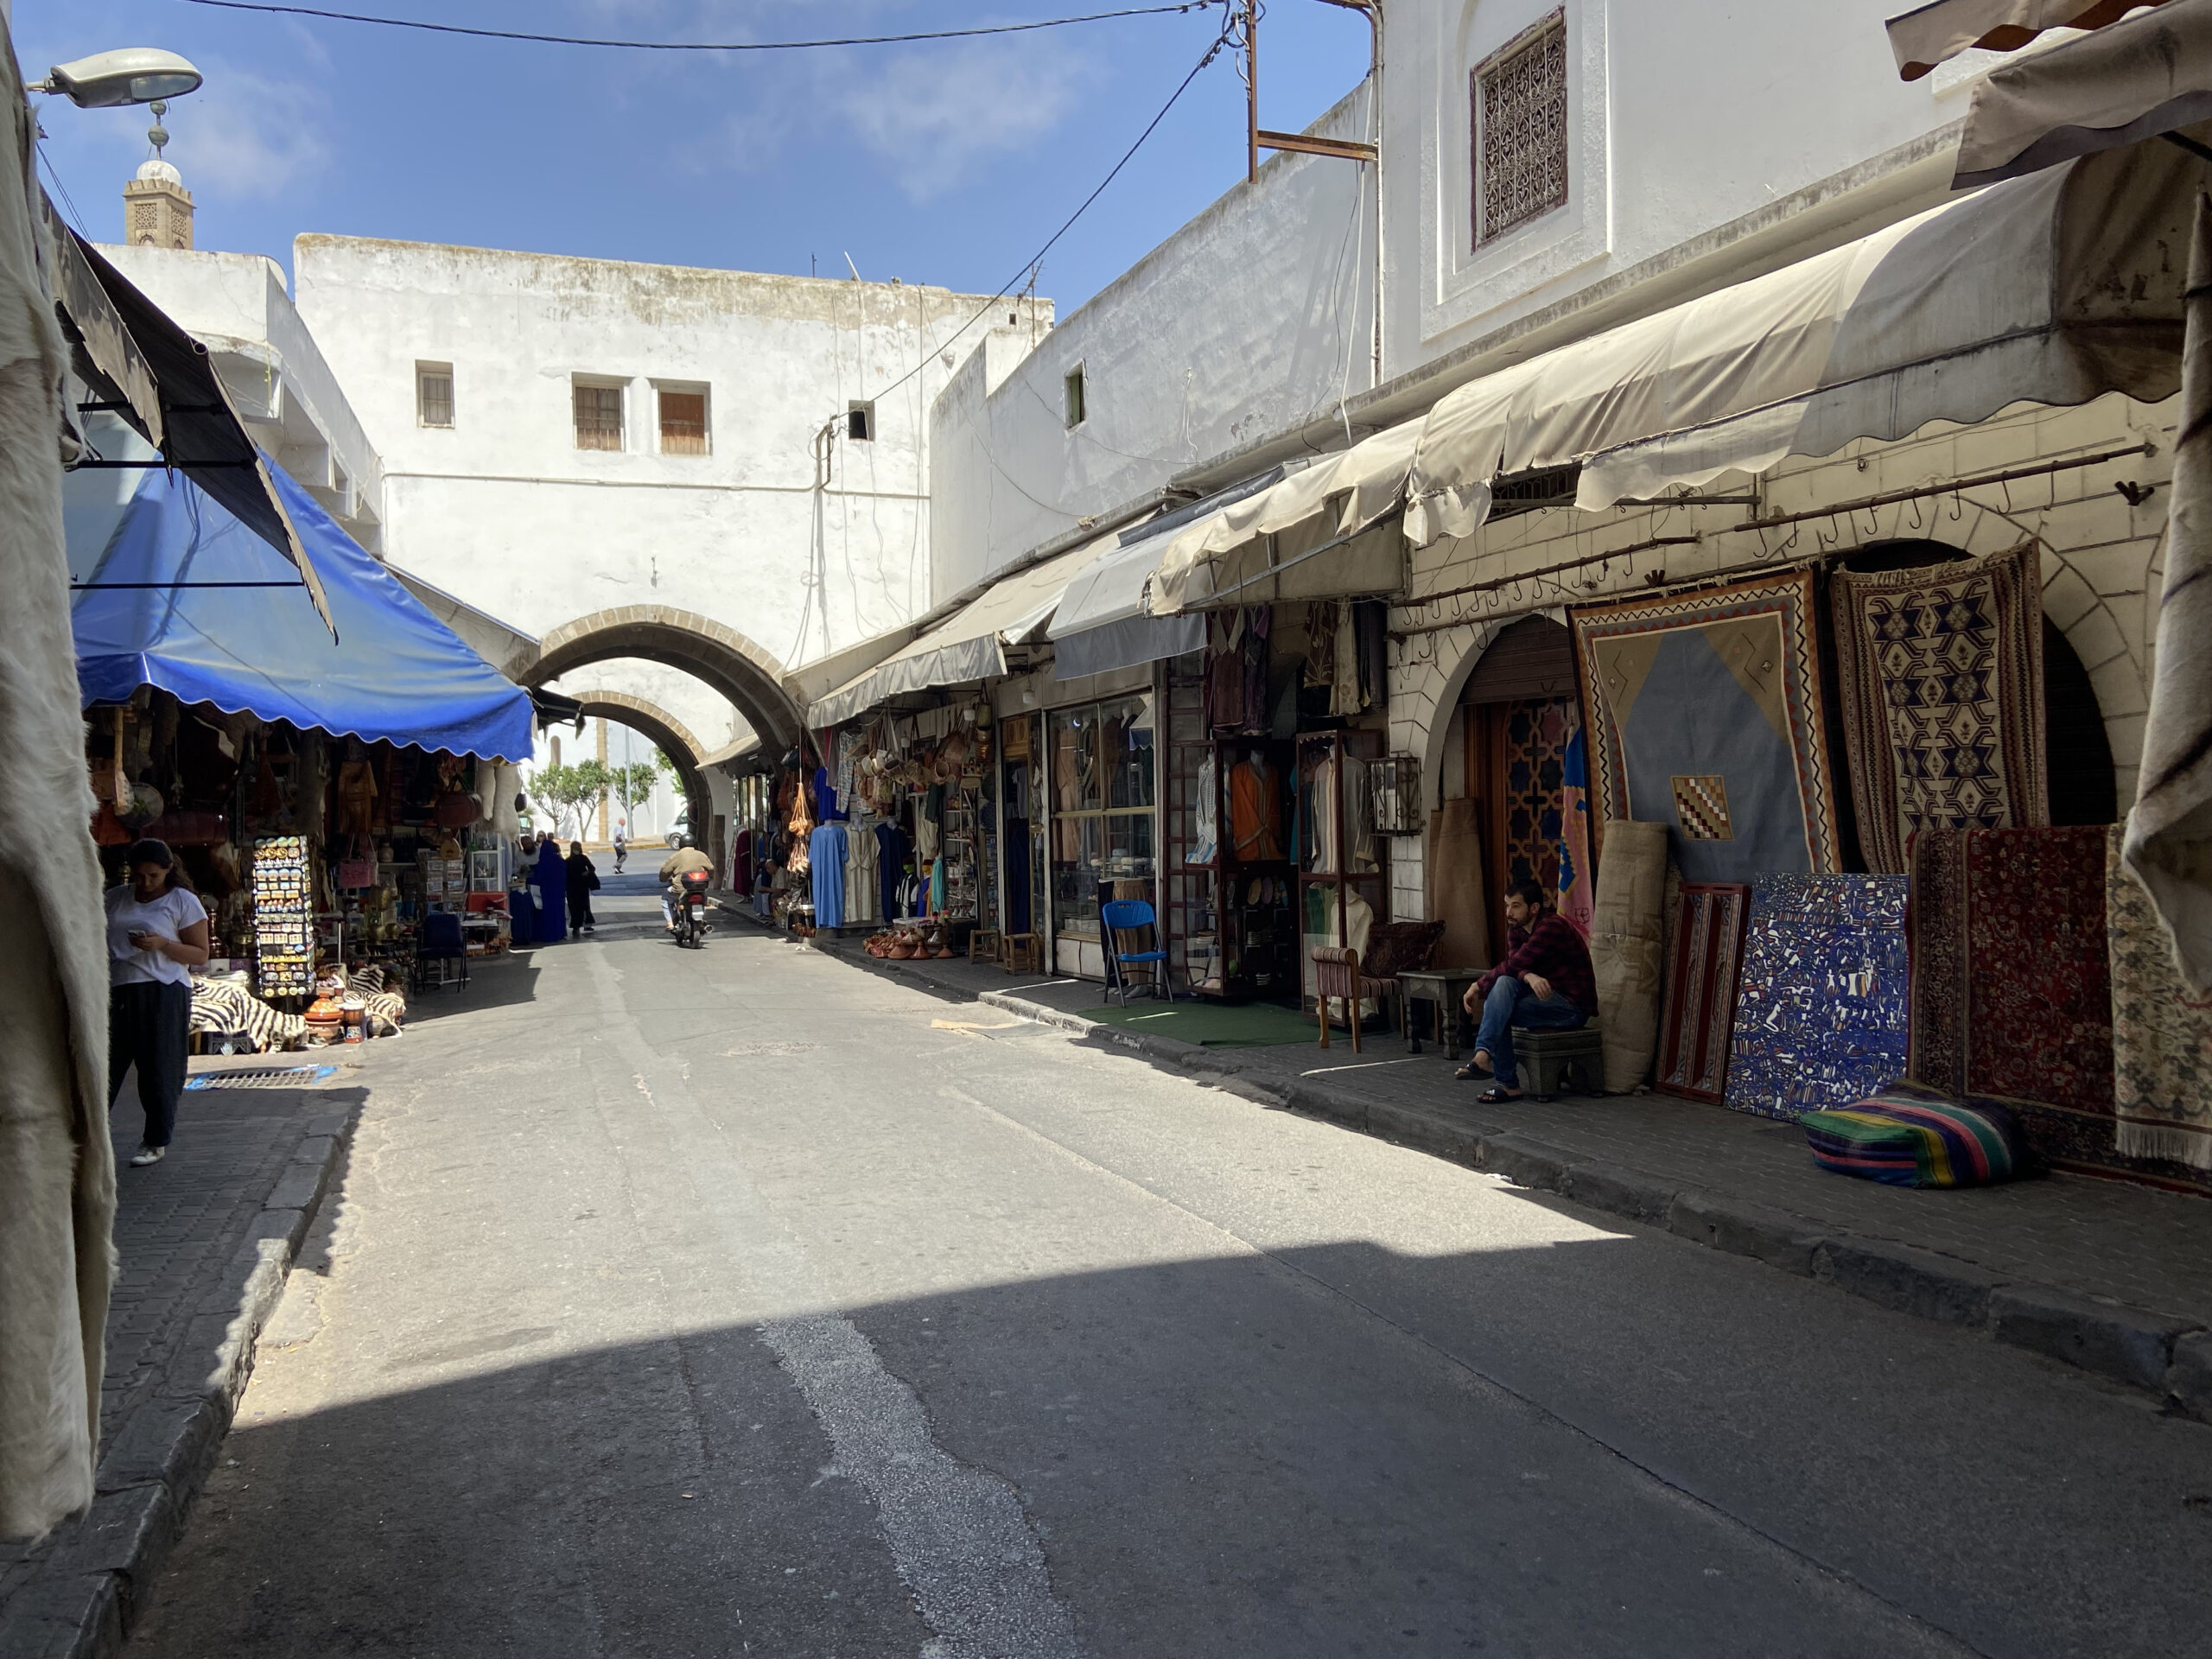 Photo taken from the middle of a street. Shops down the right hand side with various textiles.